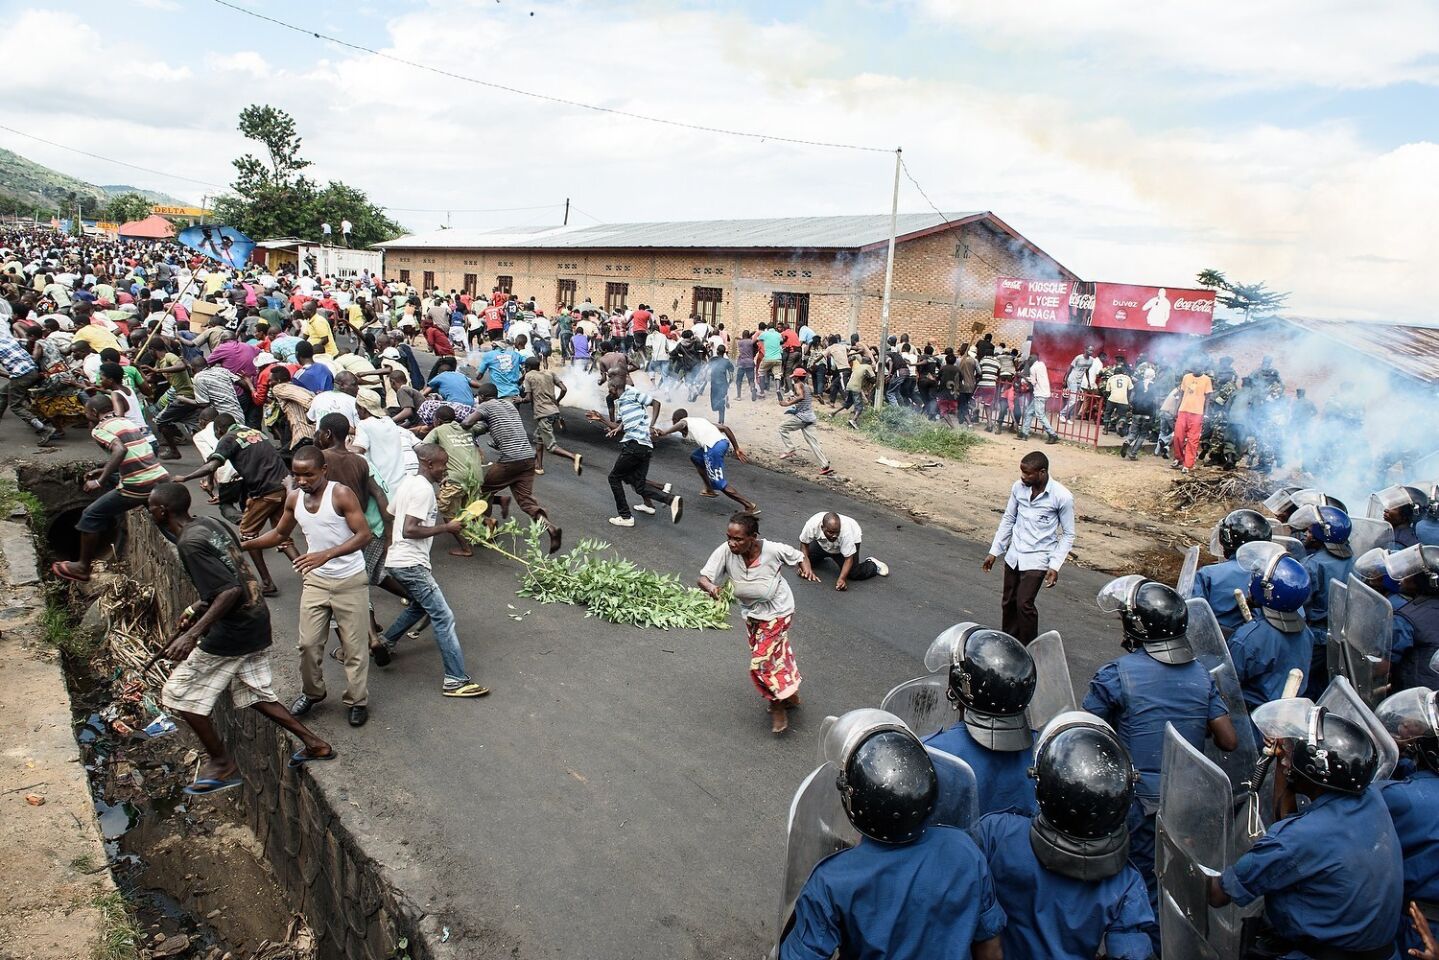 Soldiers and police face protesters during a demonstration against Burundi President Pierre Nkurunziza's bid for a third term in Bujumbura.